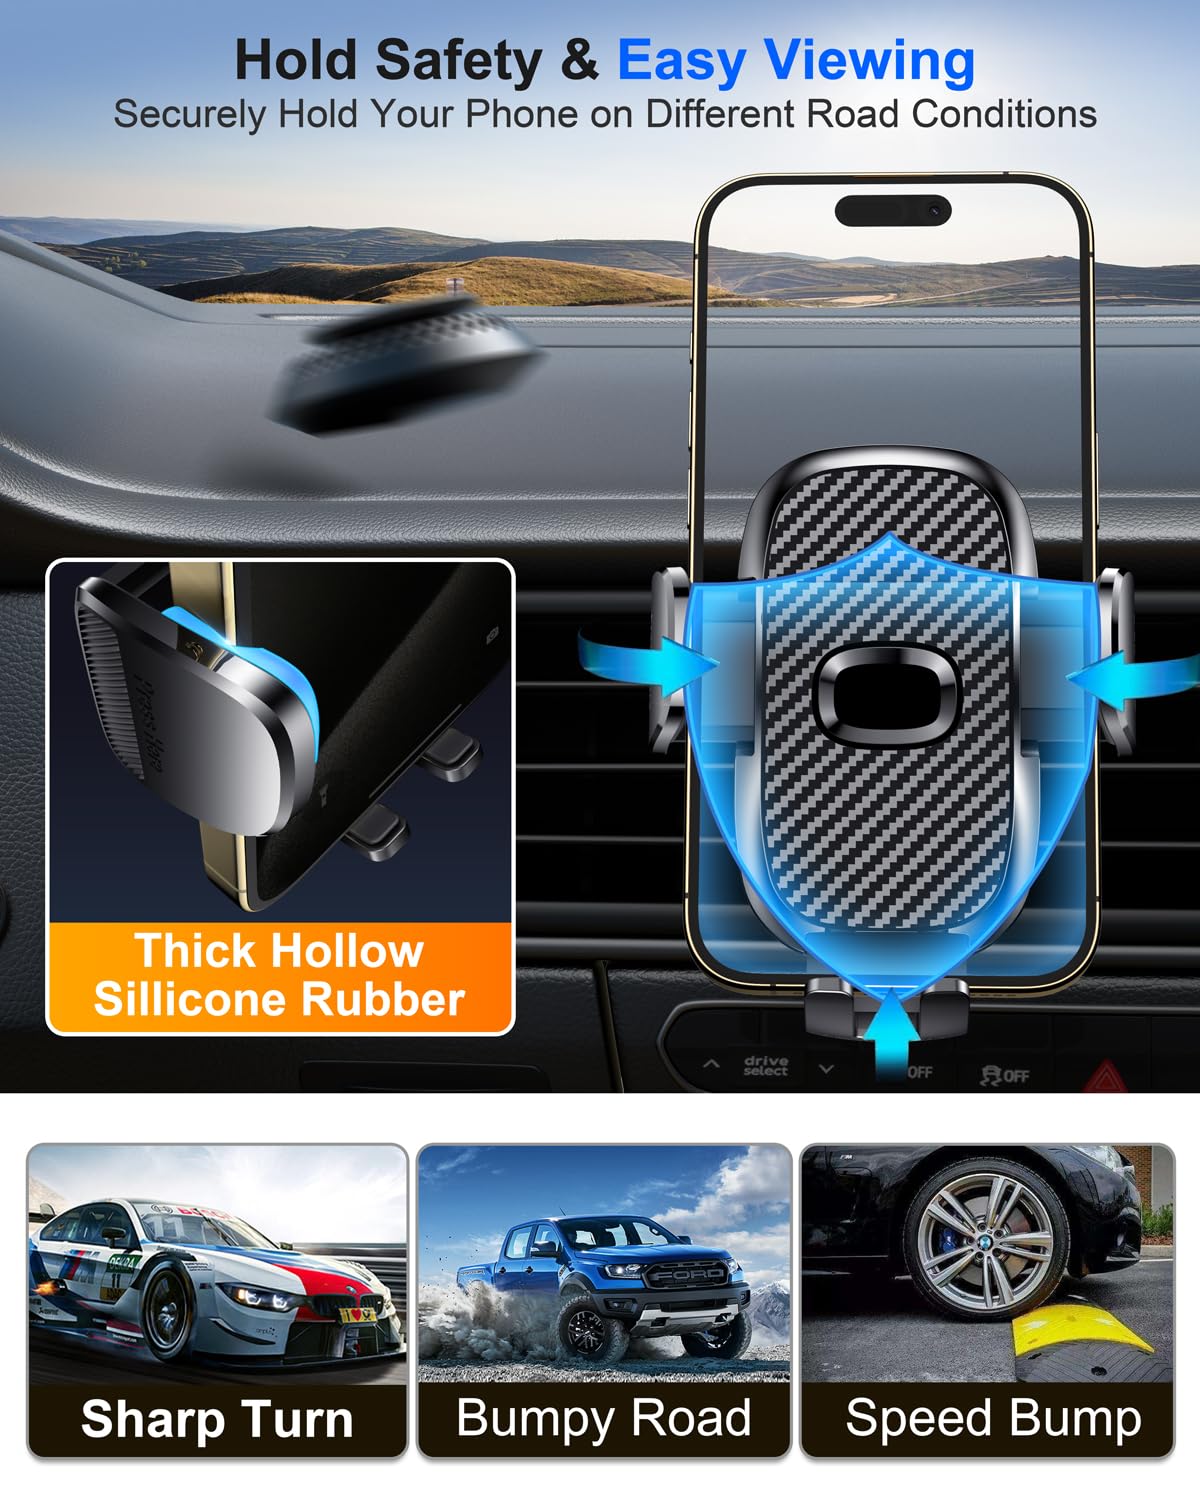 FESIYOYE Car Phone Holder[Military-Grade 360°Suction Cup]Phone Holders for Your Car Universal Accessories Air Vent Dashboard Windshield Phone Mount Automotive Cradles Fit for iPhone Android Smartphone